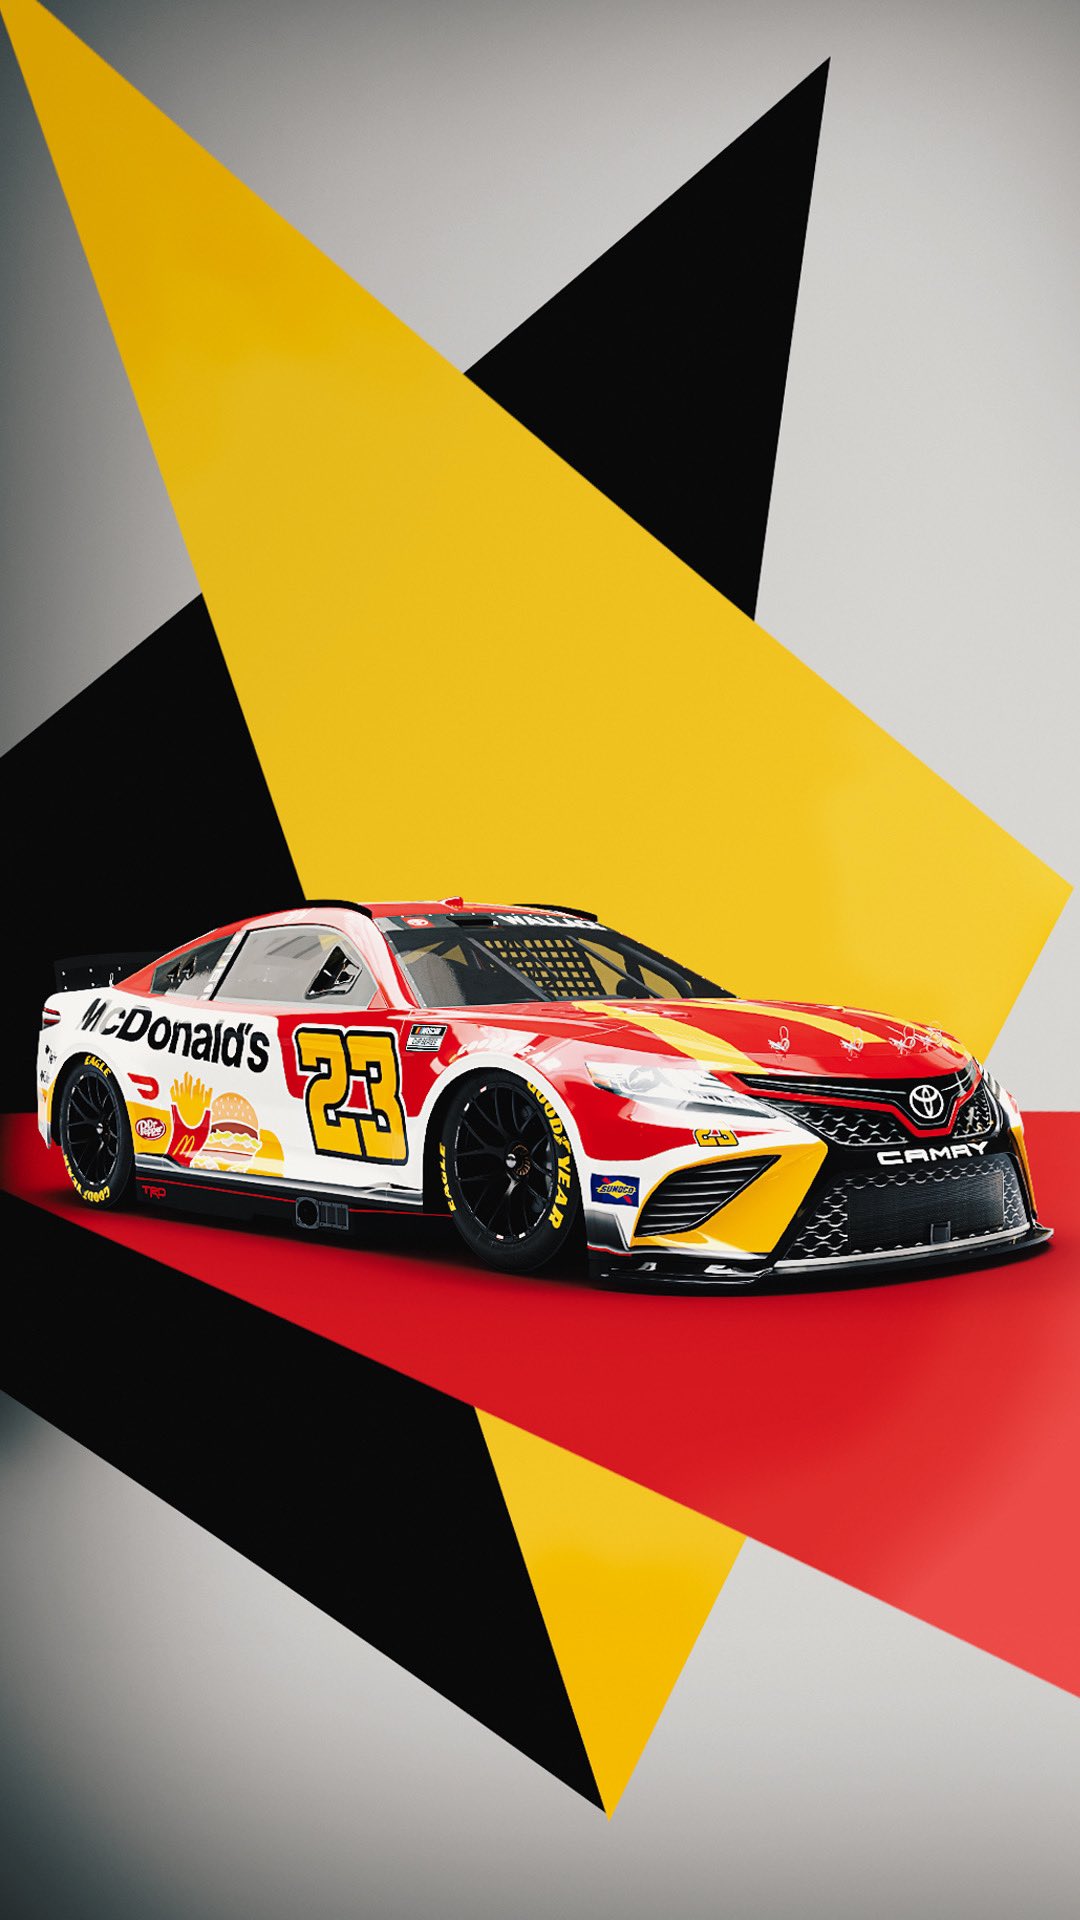 23XI Racing up some fresh wallpaper for your phones ahead of